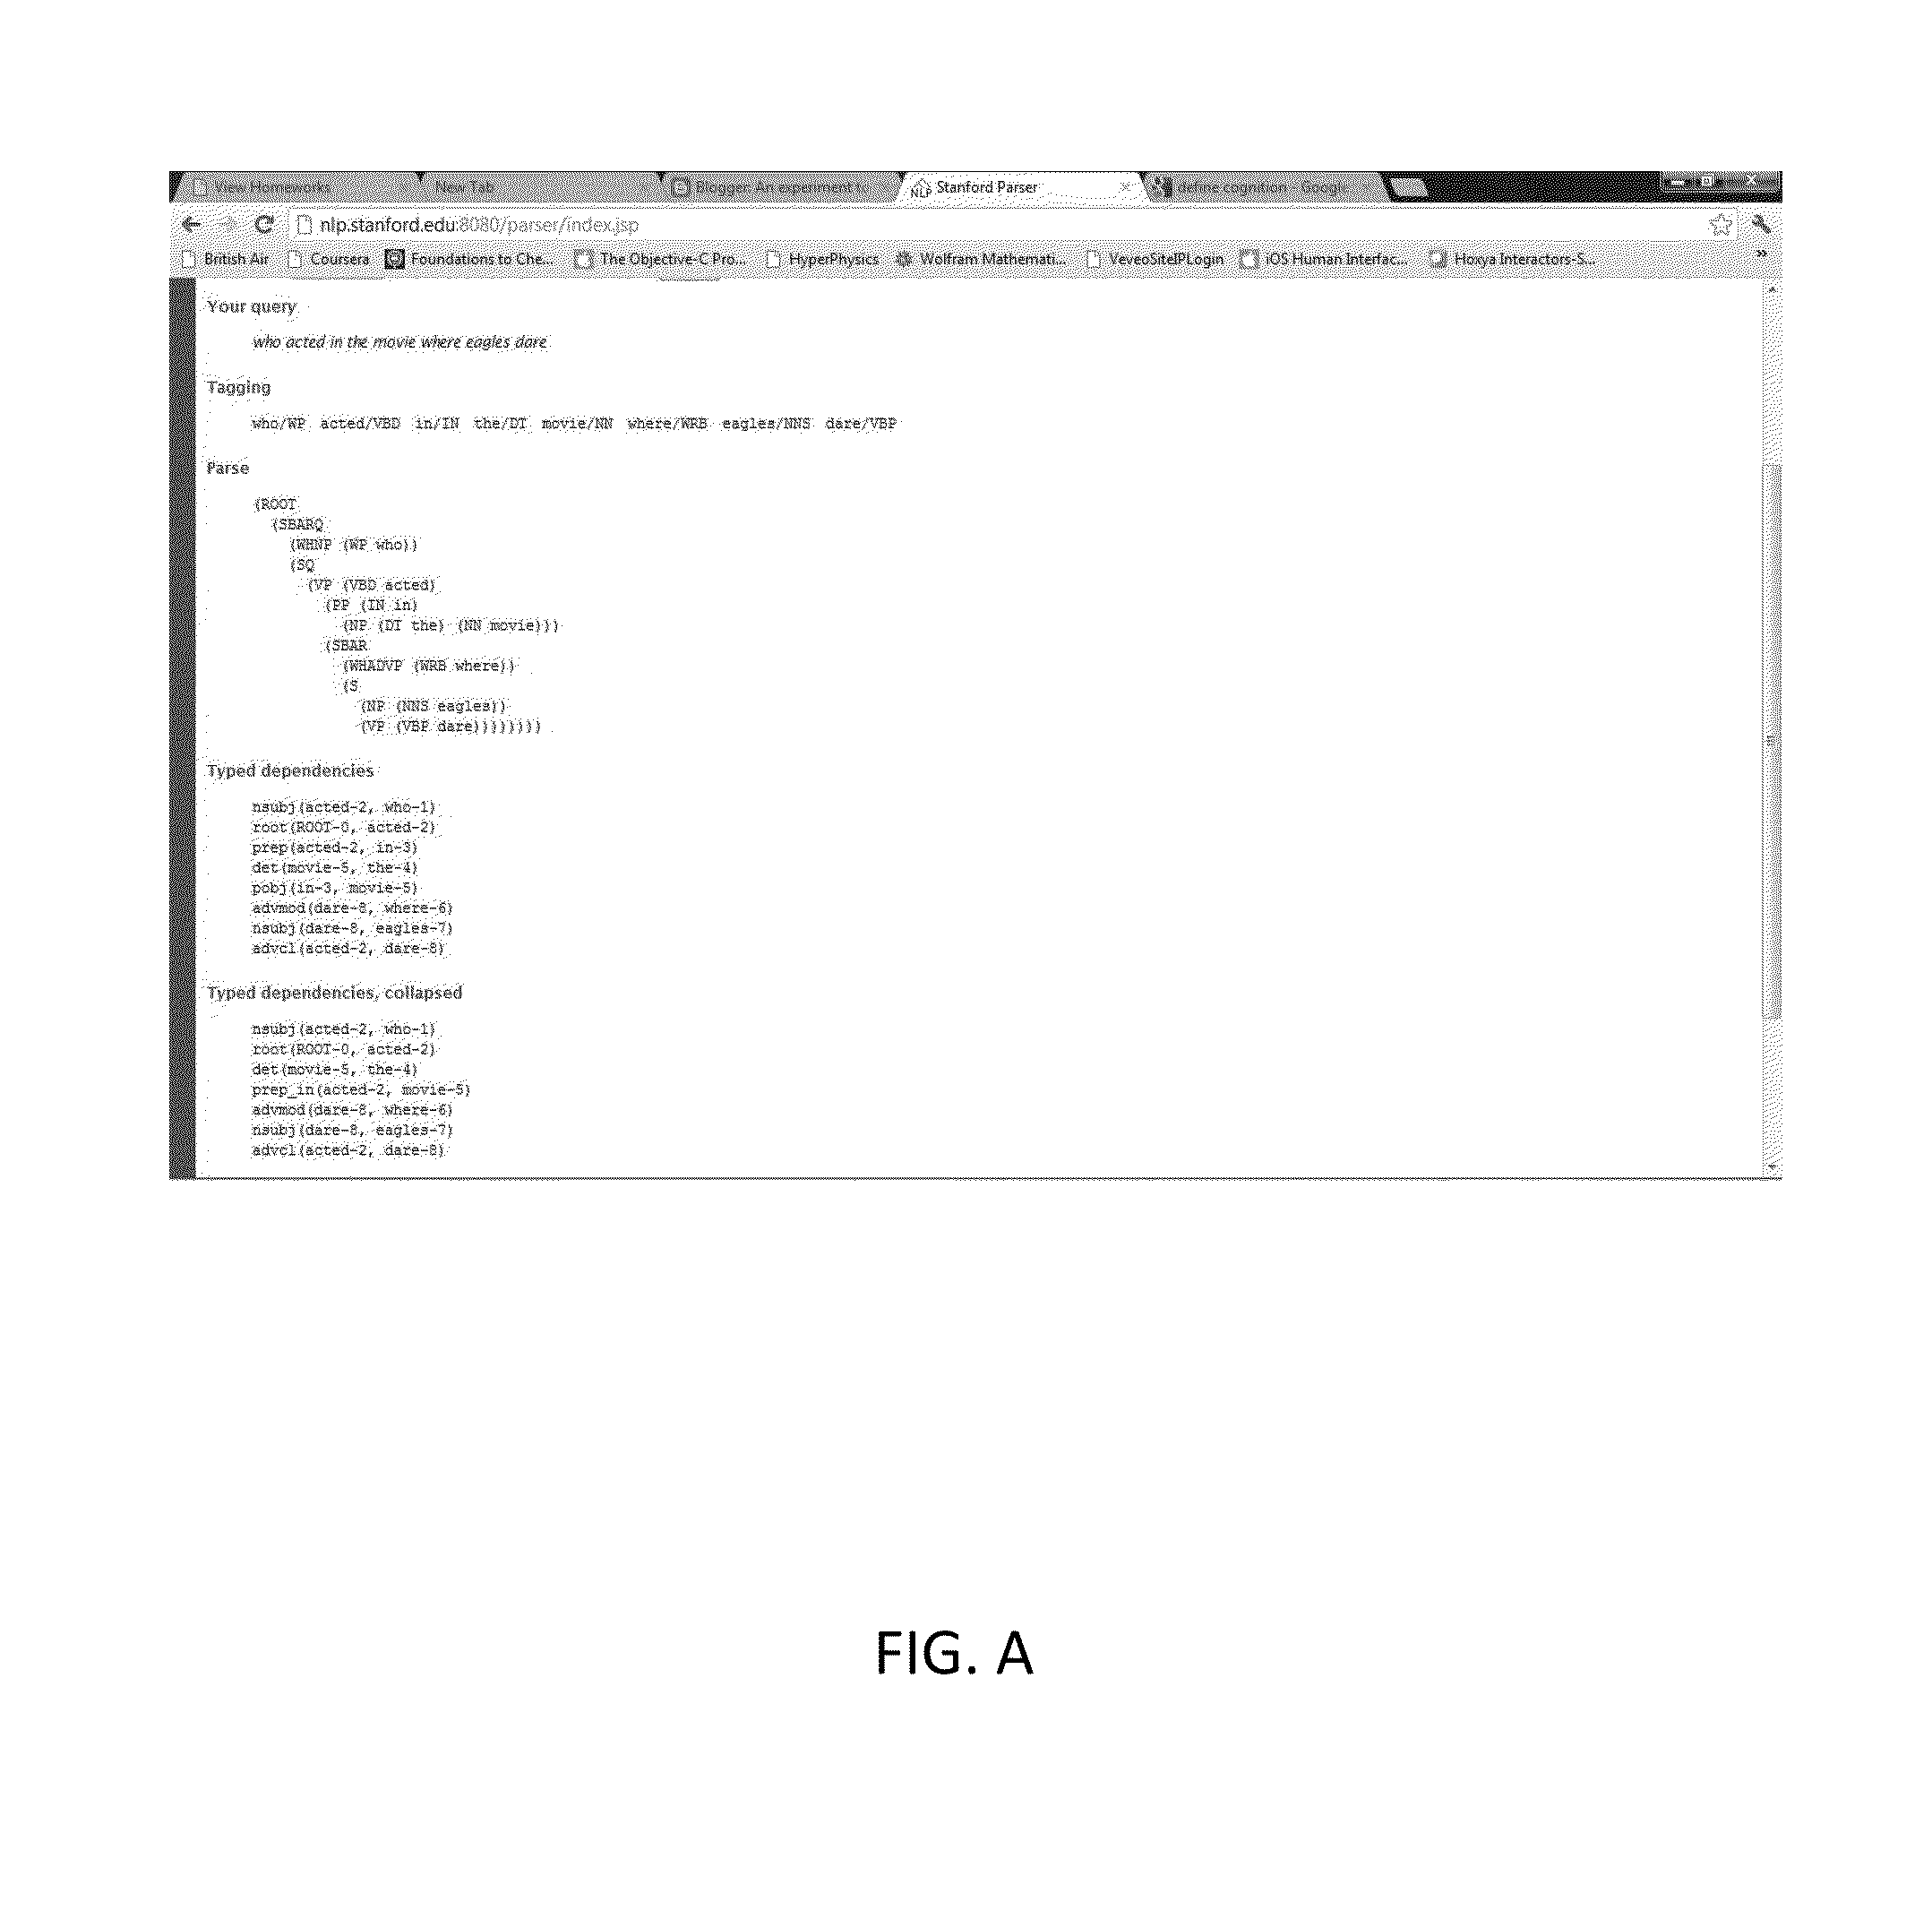 Method for using pauses detected in speech input to assist in interpreting the input during conversational interaction for information retrieval